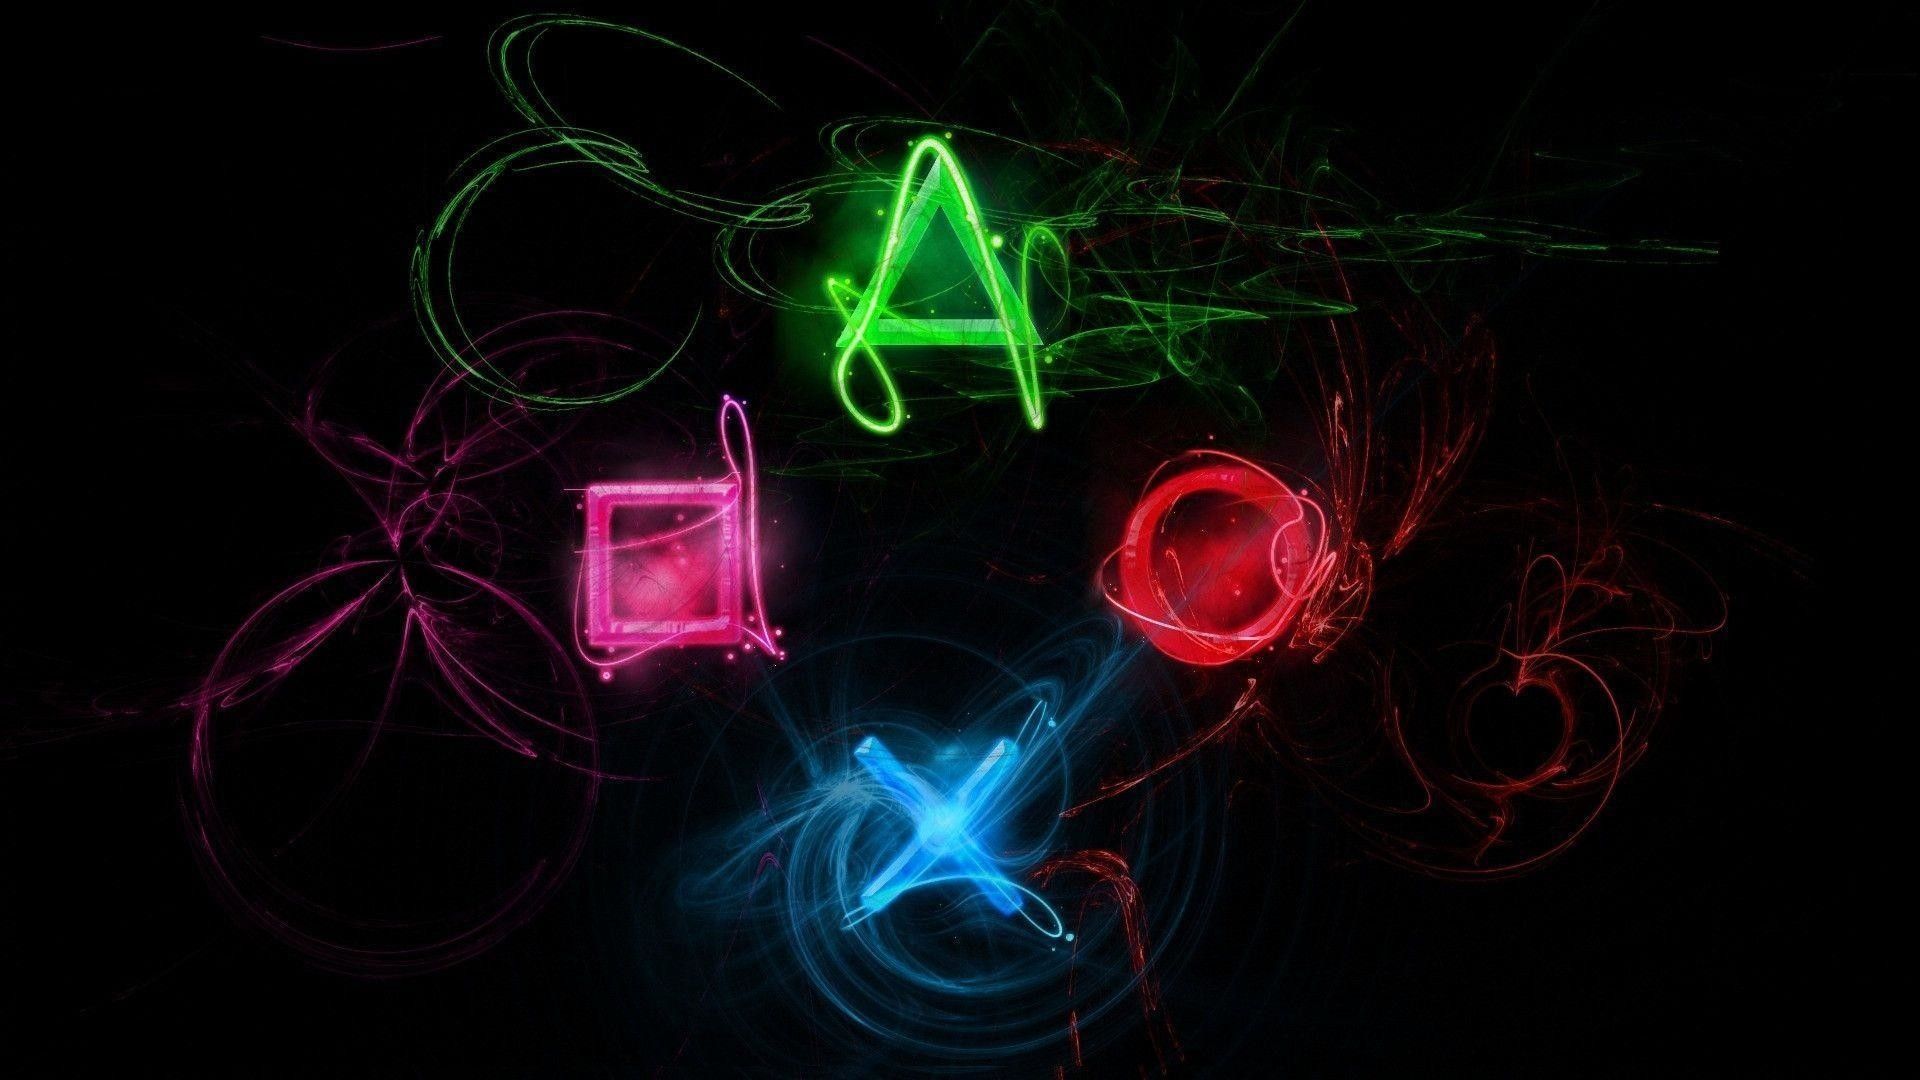 PS3 Wallpapers on WallpaperDog